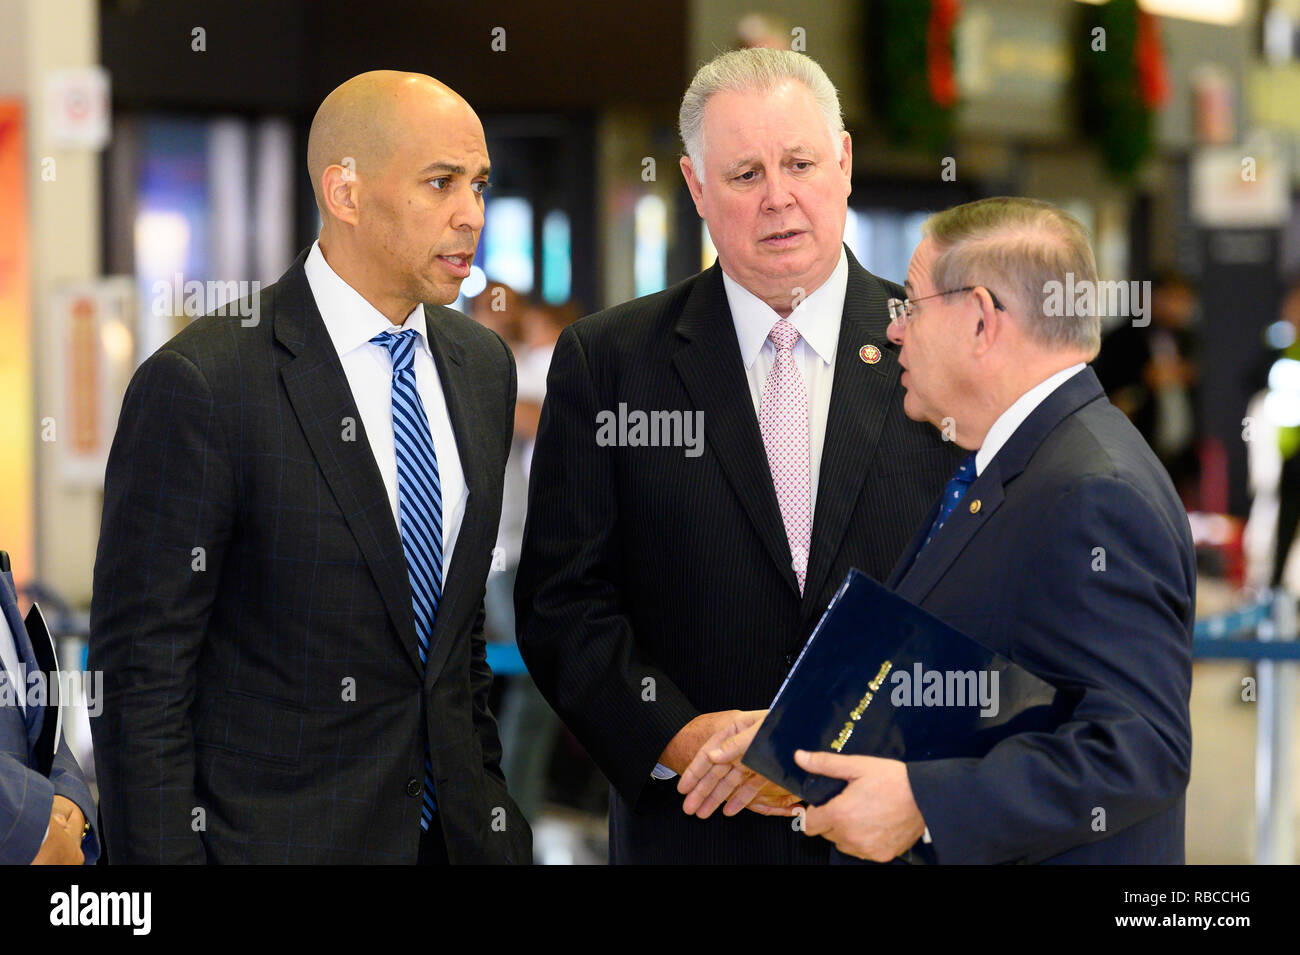 U.S. Senator Cory Booker (D-NJ), U.S. Representative Albio Sires (D-NJ) and U.S. Senator Bob Menendez (D-NJ) seen at a news conference at Newark Liberty International Airport to demand an end to the partial government shutdown leaving thousands of federal workers in New Jersey without pay and to highlight the impacts of lost services being felt statewide. At Newark Liberty International Airport in Newark, New Jersey on January 8,  2019. Stock Photo